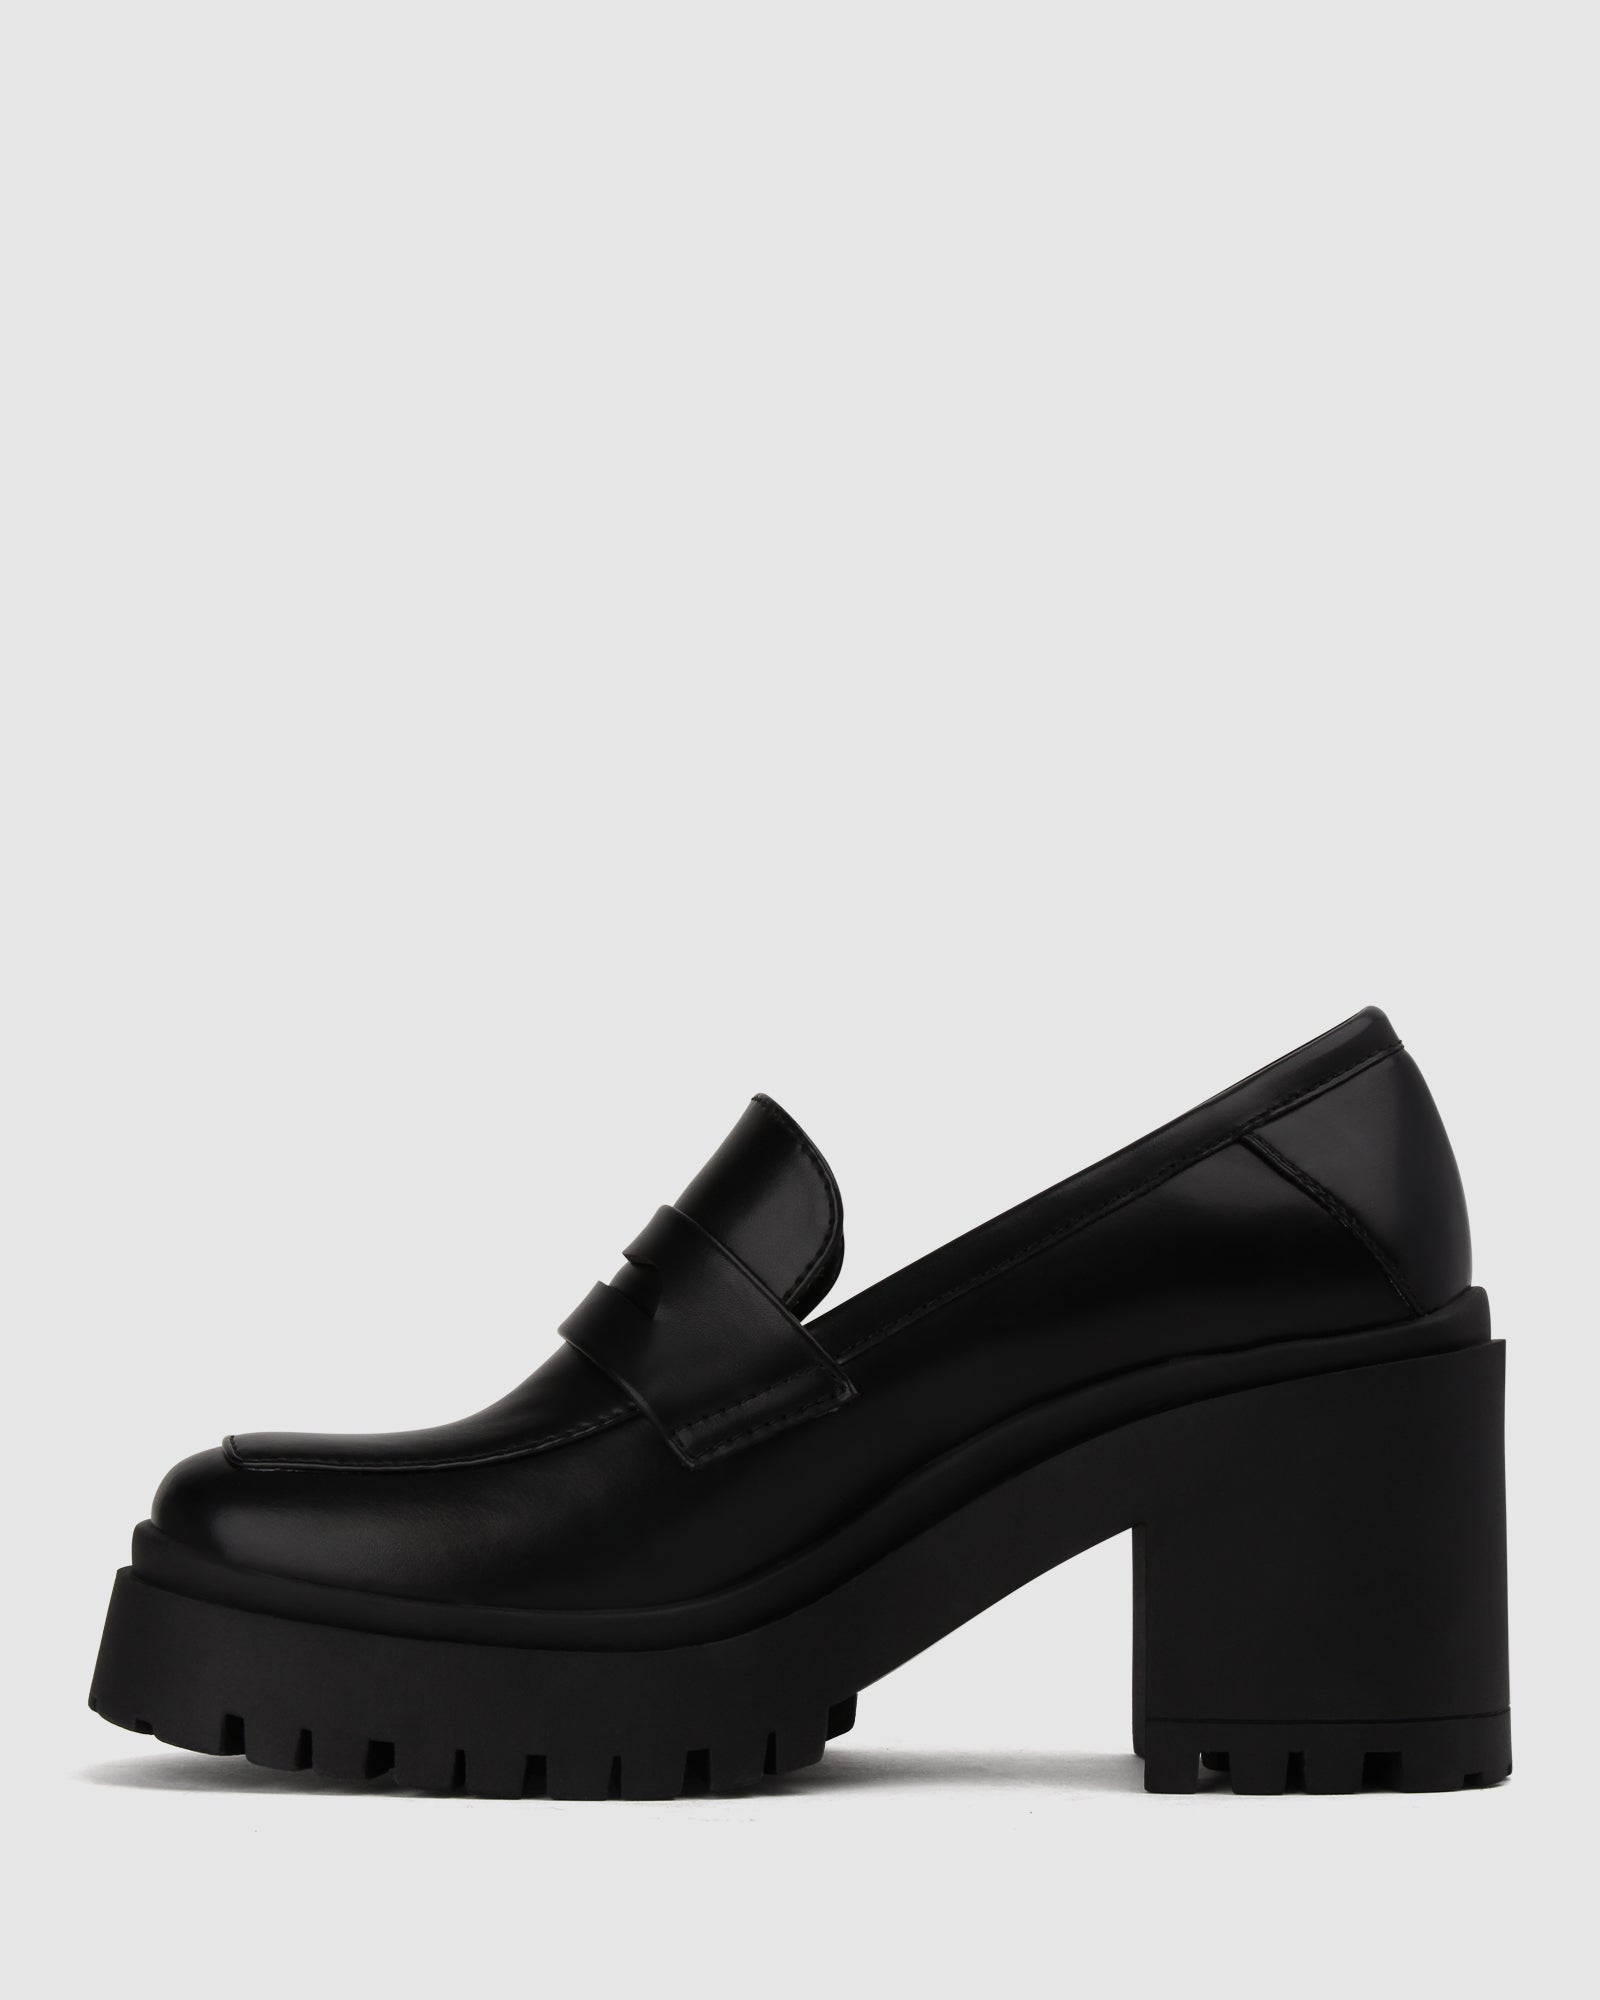 Darvey Square Toe Heeled Loafers by Betts Online | THE ICONIC | Australia